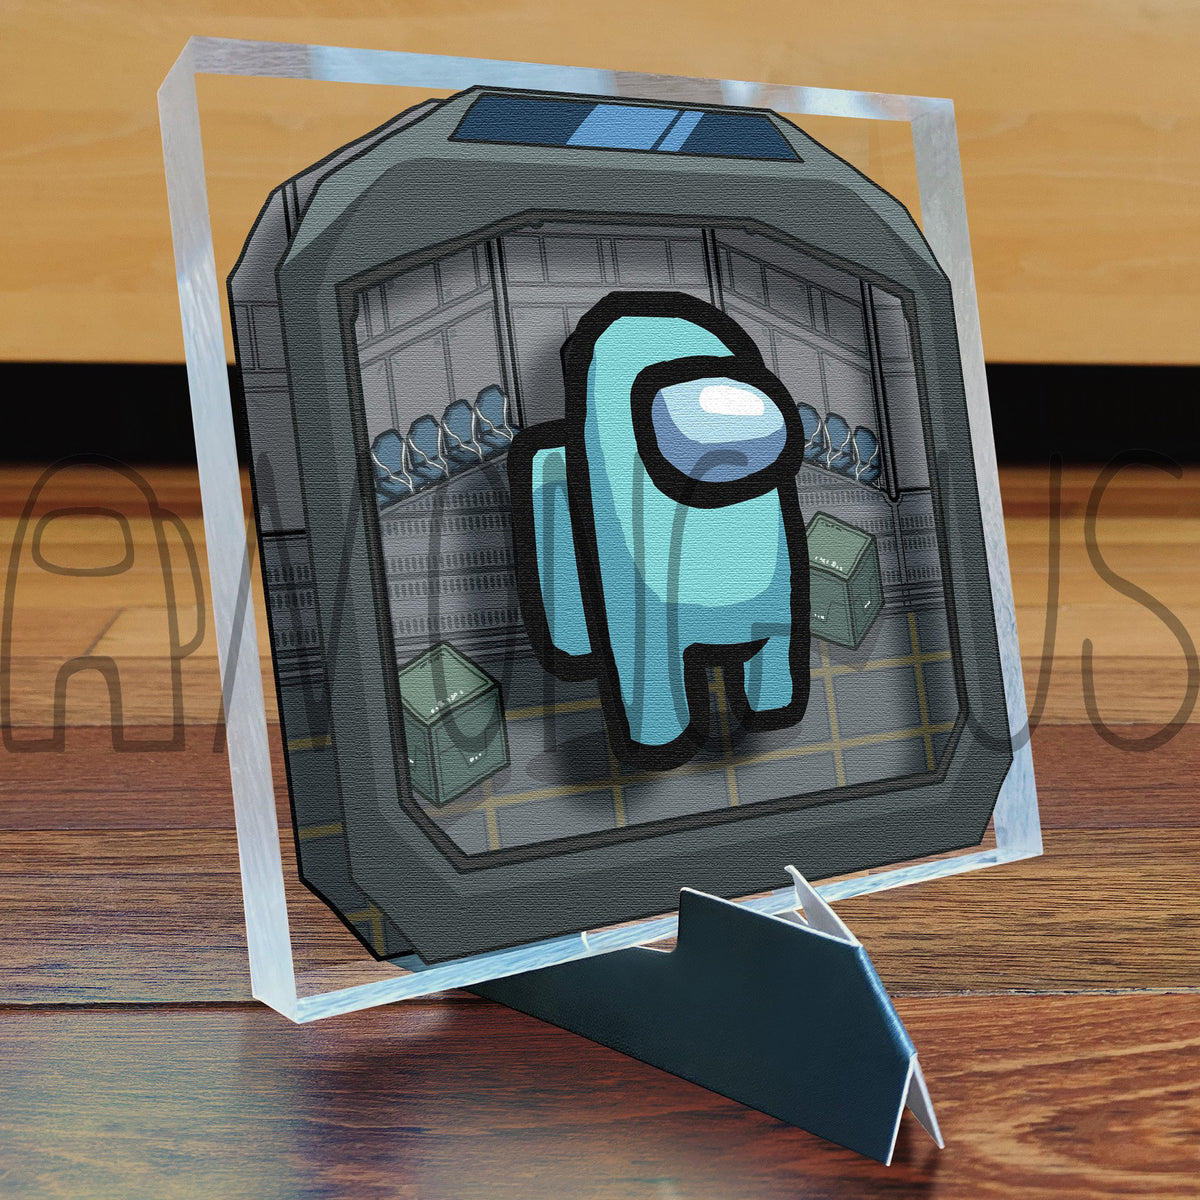 Among Us: Crewmate Art Tiles by Artovision3D